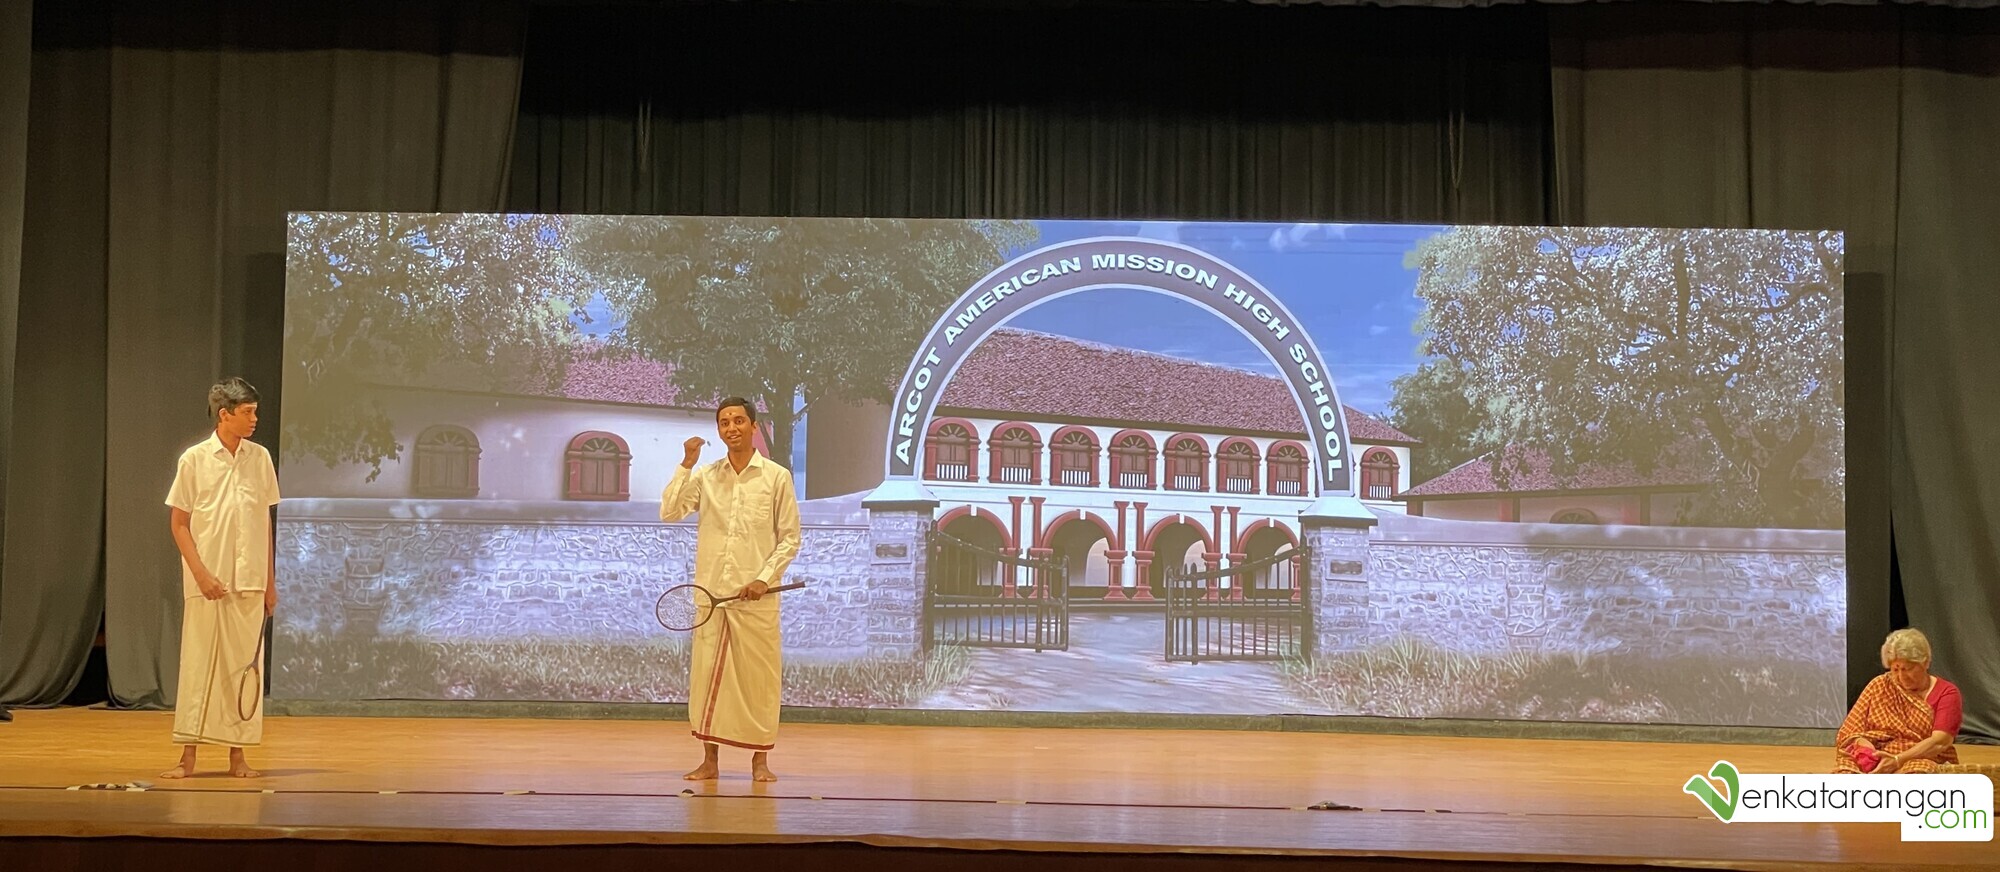 Actor Deeraj Mohan in front of a scene of the Arcot American Mission High School